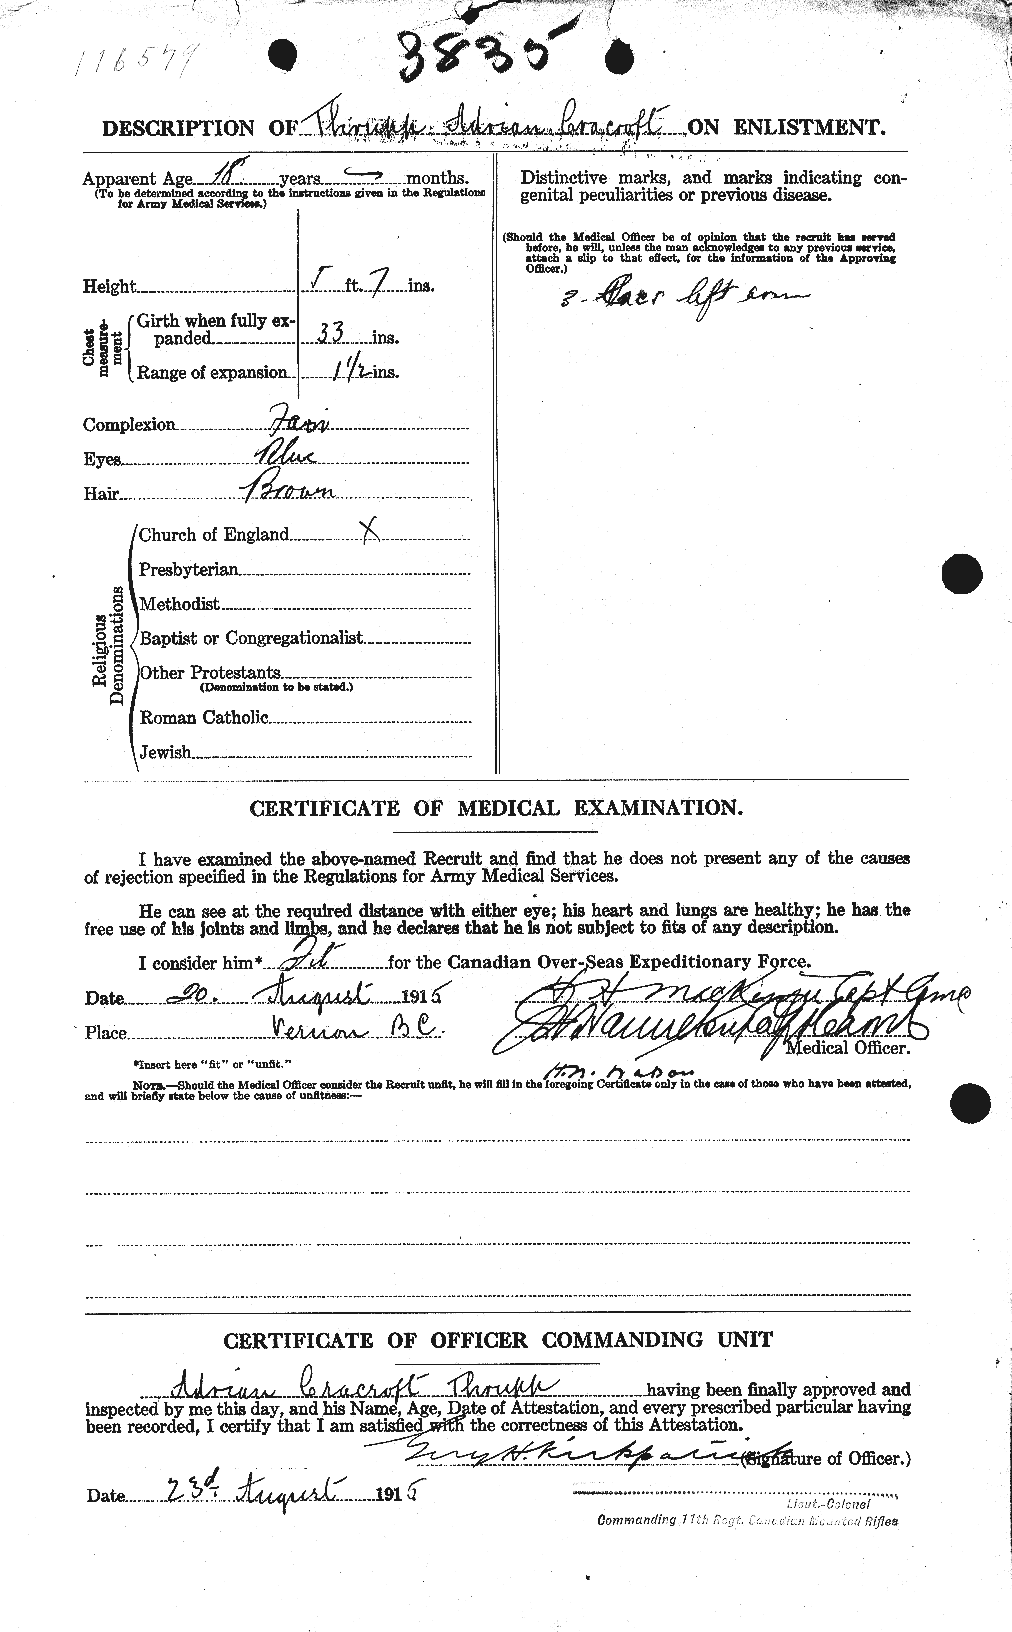 Personnel Records of the First World War - CEF 635168b